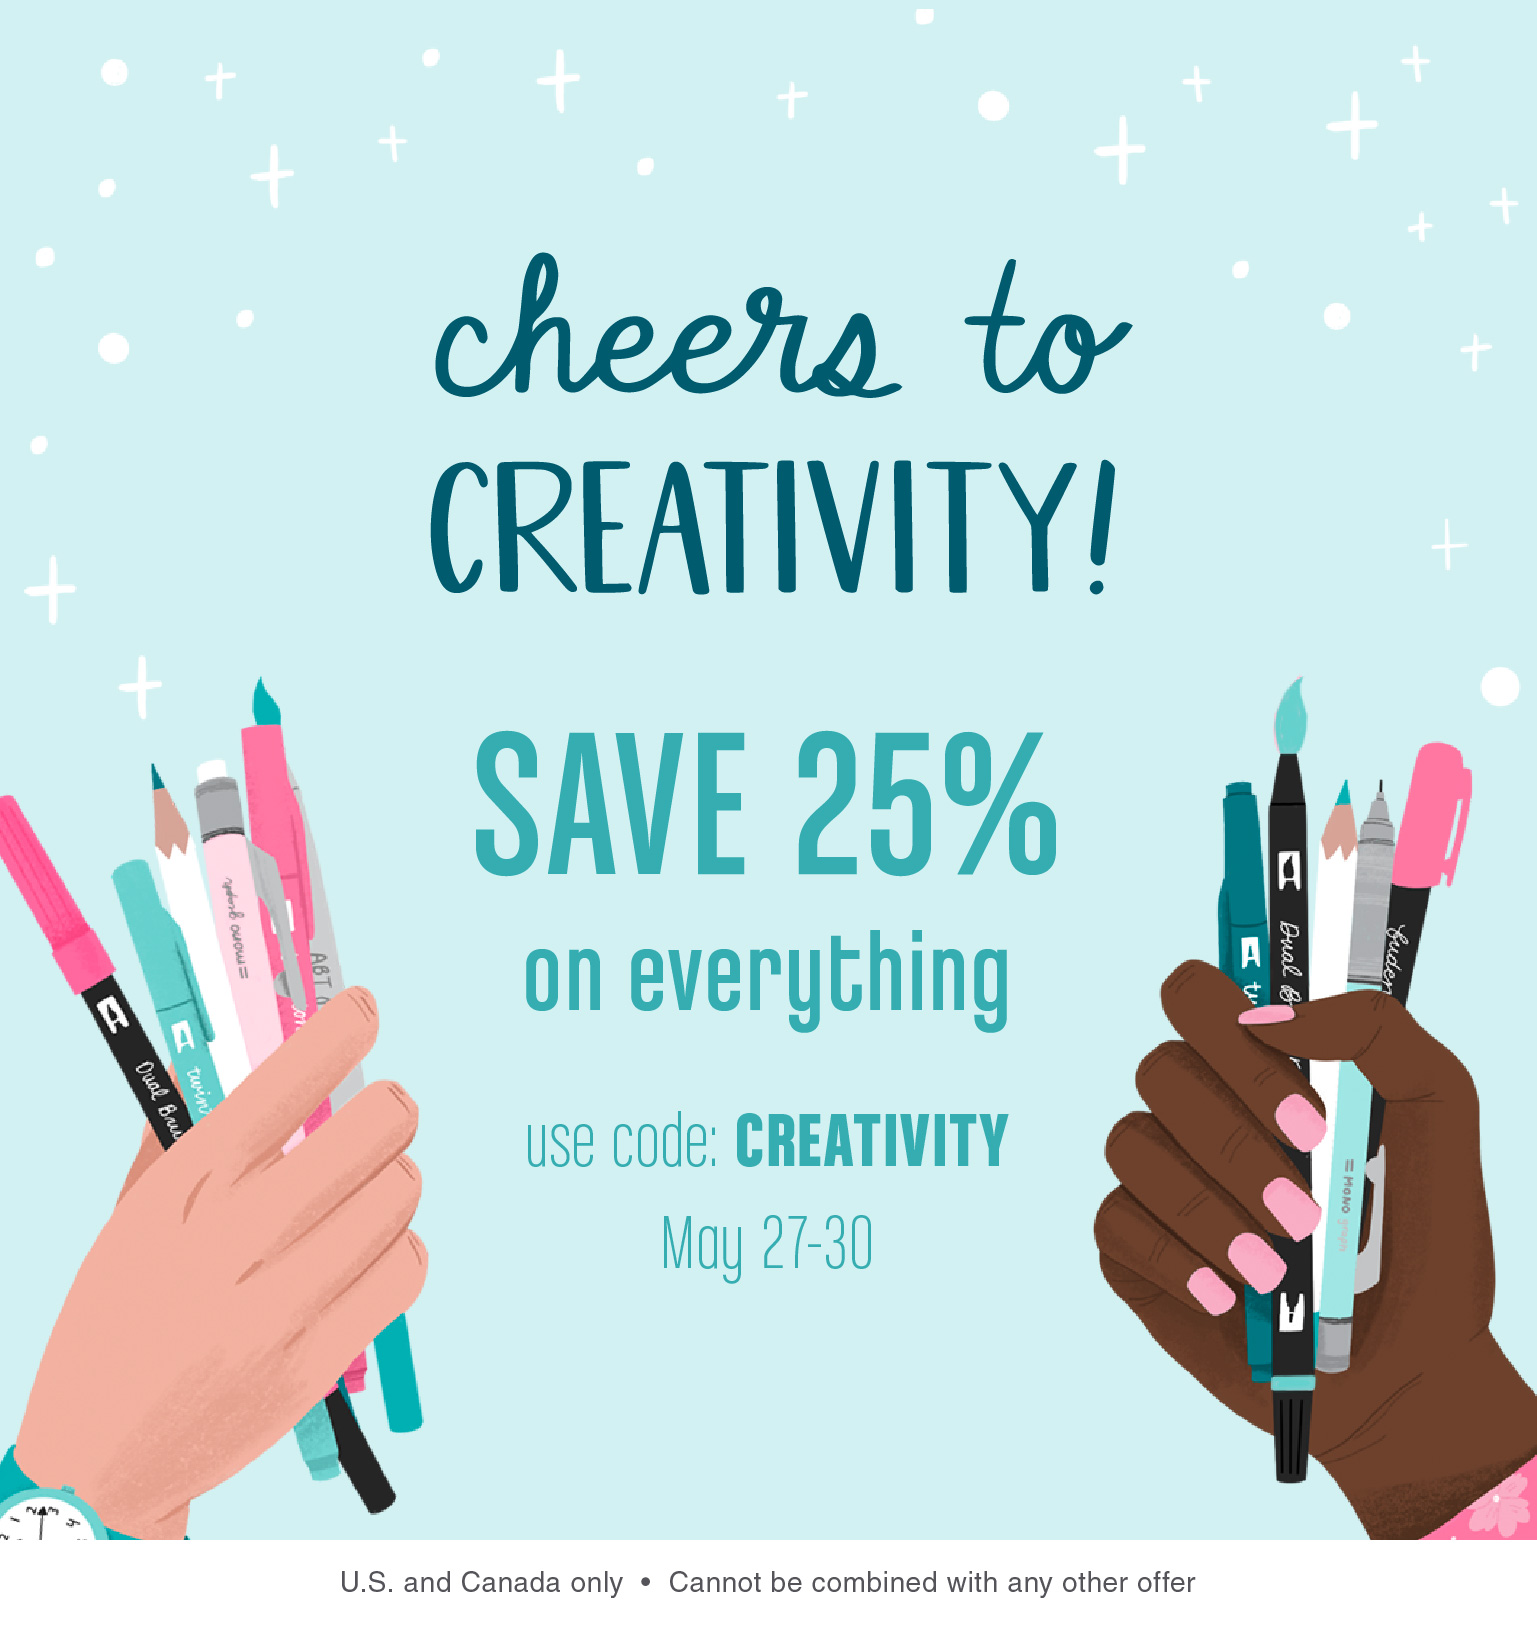 Celebrate creativity! 25% off all Tombow products. Use code CREATIVITY now through May 30th at checkout. Cannot be combined with any other offer. United States and Canada only.